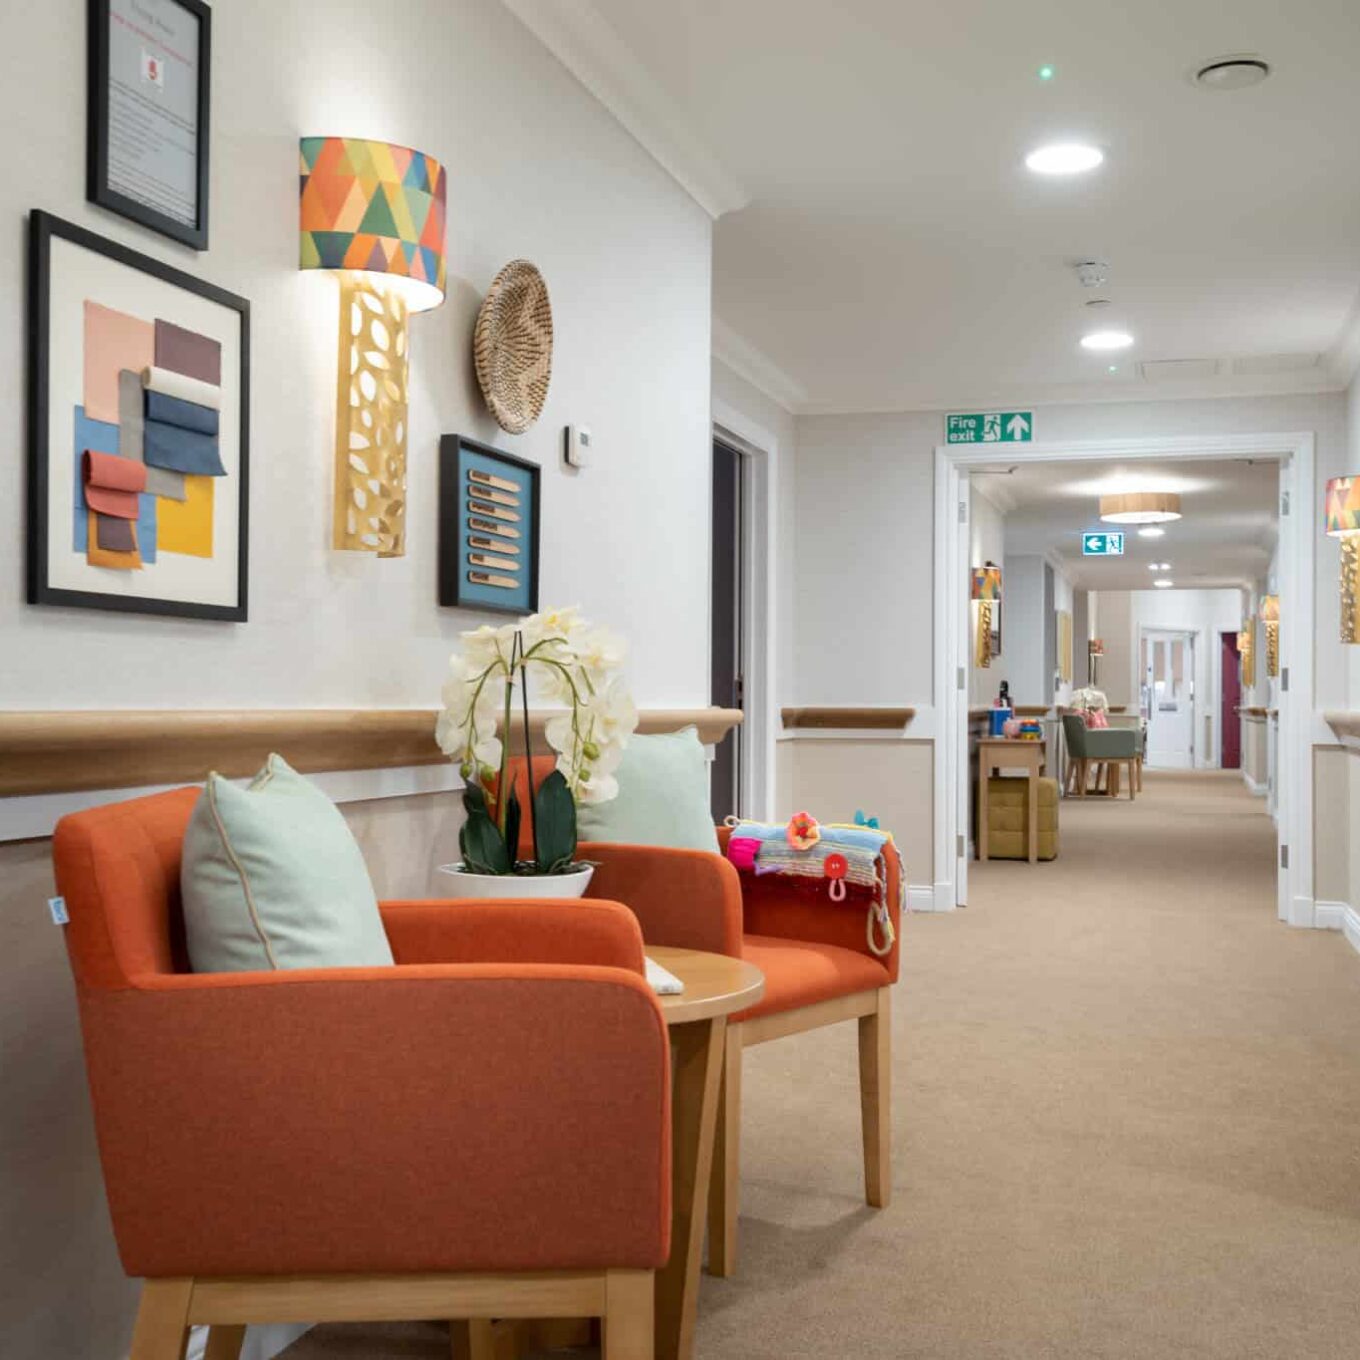 Corridor with artwork on the wall at Elsyng House Care Home in Enfield